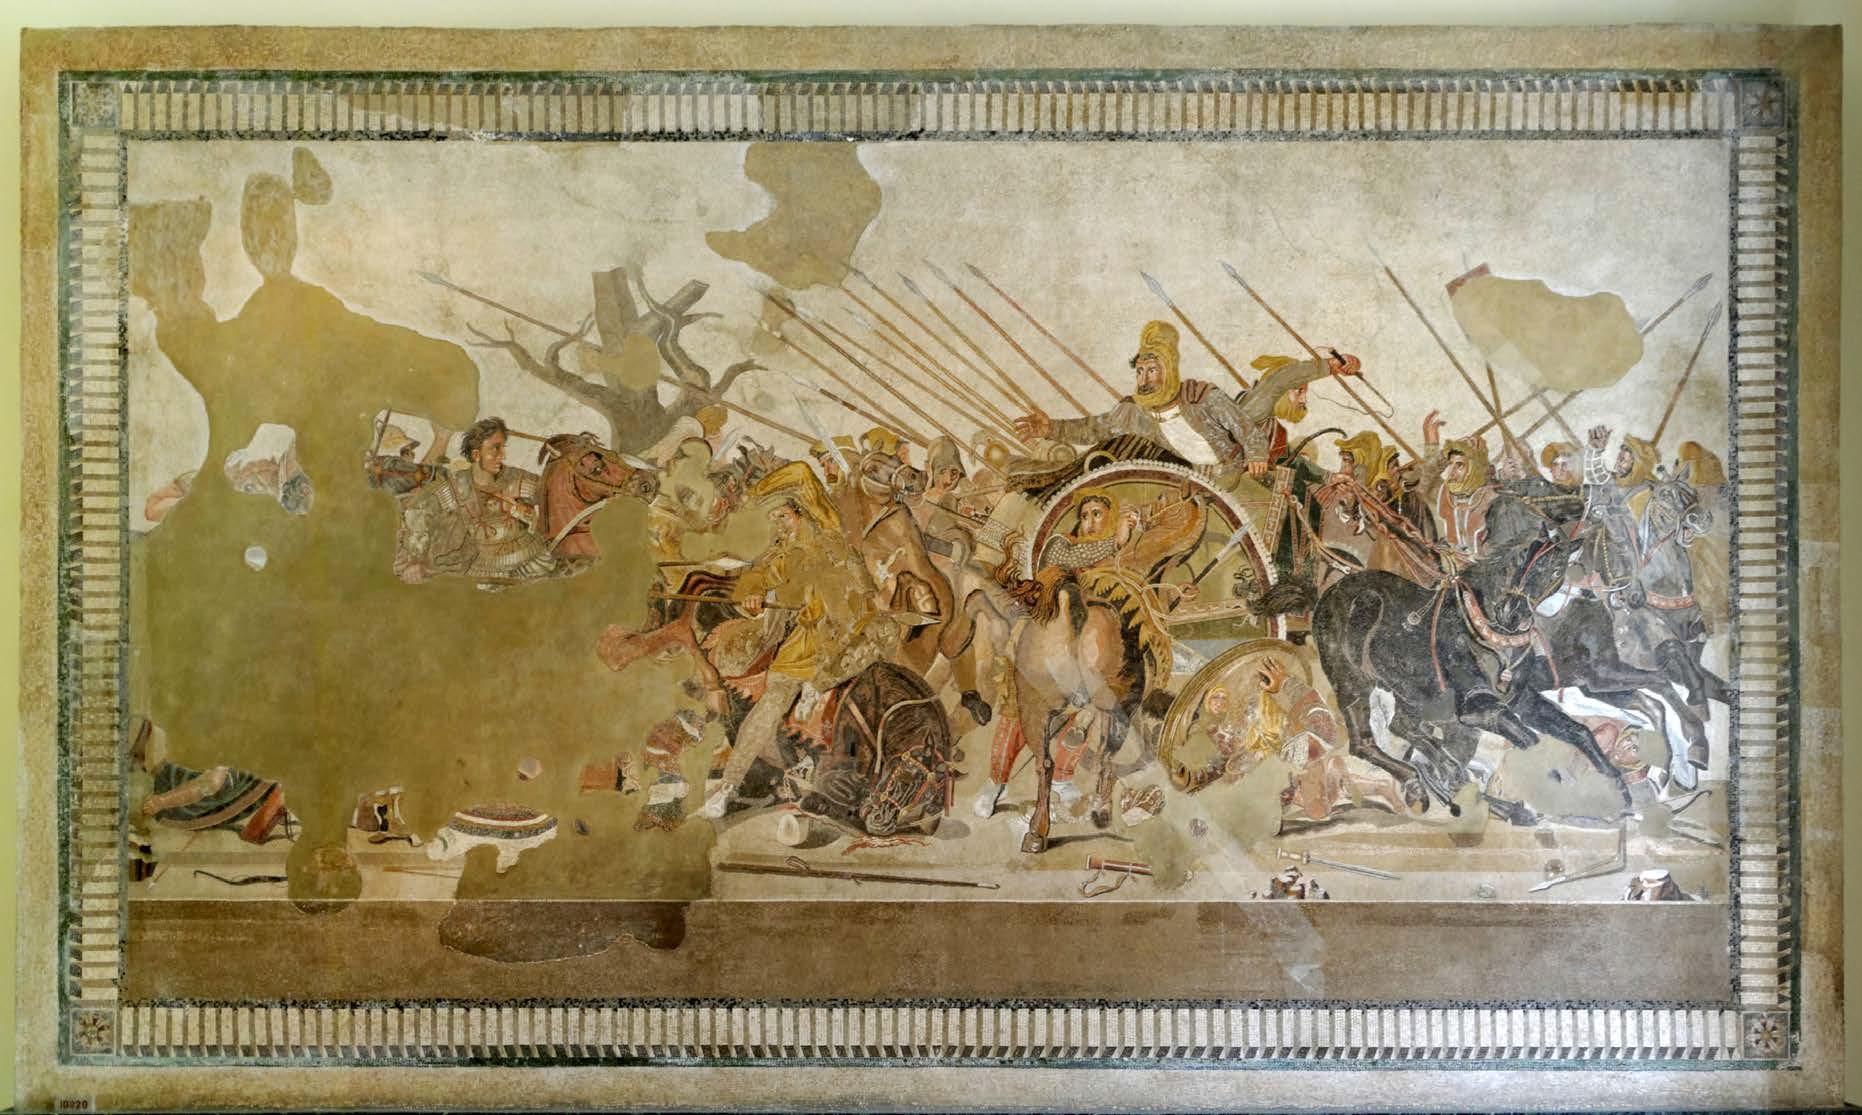 Alexander fighting Darius in the Battle of Issus (333 BCE). Mosaic from the House of the Faun, Pompeii. Note Alexander on the left side of the mosaic, fighting on horseback, while Darius, almost at the middle, charges in a chariot.